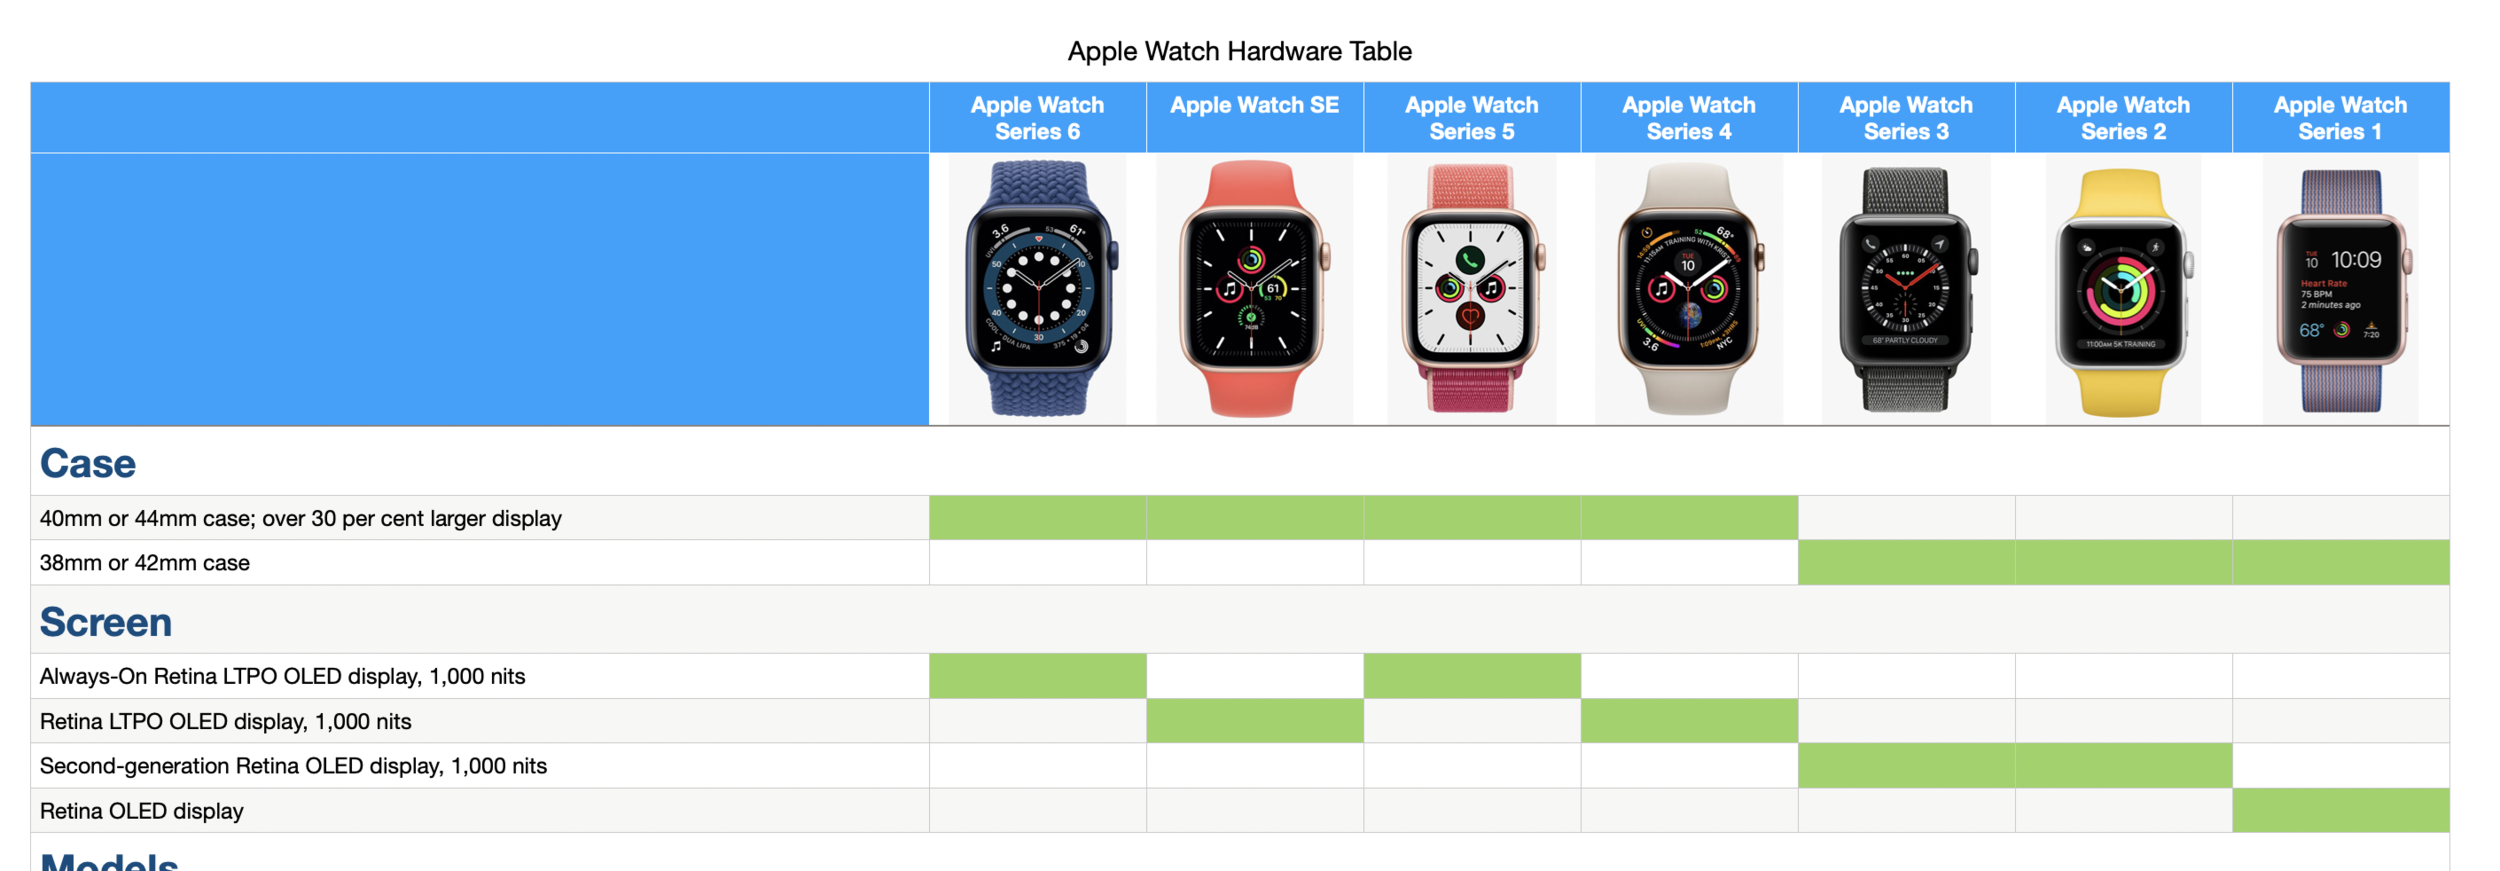 Curated Hardware Comparison Table Apple Watch Series 1 thru 6 (via SE